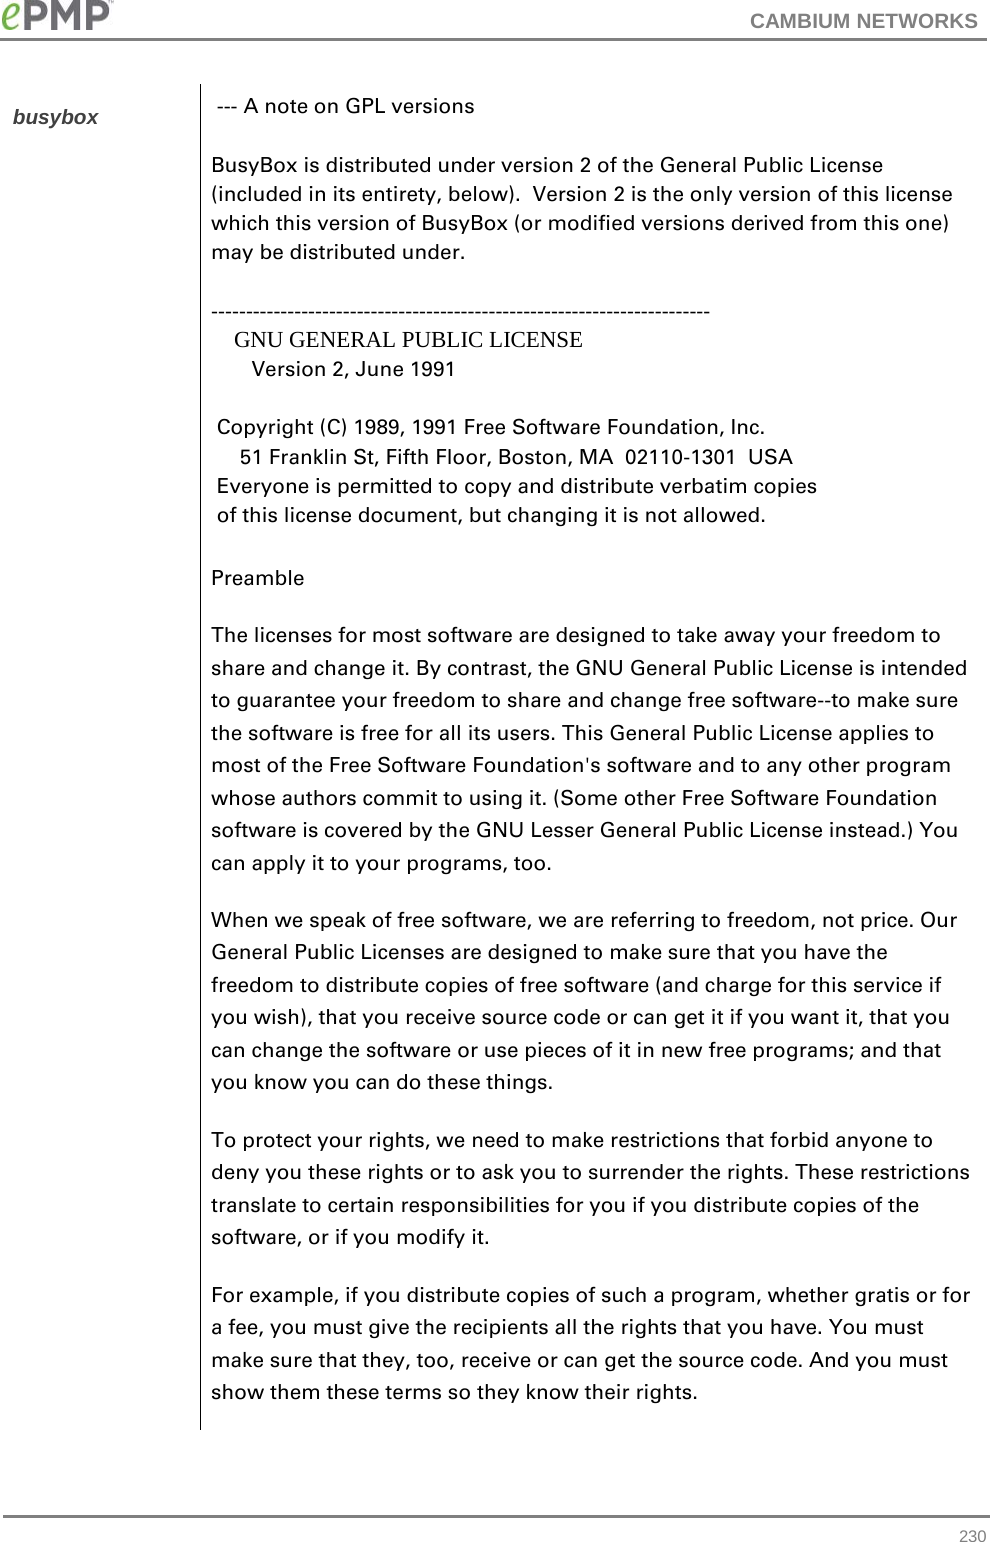 CAMBIUM NETWORKS  busybox  --- A note on GPL versions  BusyBox is distributed under version 2 of the General Public License (included in its entirety, below).  Version 2 is the only version of this license which this version of BusyBox (or modified versions derived from this one) may be distributed under.  ------------------------------------------------------------------------     GNU GENERAL PUBLIC LICENSE        Version 2, June 1991   Copyright (C) 1989, 1991 Free Software Foundation, Inc.      51 Franklin St, Fifth Floor, Boston, MA  02110-1301  USA  Everyone is permitted to copy and distribute verbatim copies  of this license document, but changing it is not allowed. Preamble The licenses for most software are designed to take away your freedom to share and change it. By contrast, the GNU General Public License is intended to guarantee your freedom to share and change free software--to make sure the software is free for all its users. This General Public License applies to most of the Free Software Foundation&apos;s software and to any other program whose authors commit to using it. (Some other Free Software Foundation software is covered by the GNU Lesser General Public License instead.) You can apply it to your programs, too. When we speak of free software, we are referring to freedom, not price. Our General Public Licenses are designed to make sure that you have the freedom to distribute copies of free software (and charge for this service if you wish), that you receive source code or can get it if you want it, that you can change the software or use pieces of it in new free programs; and that you know you can do these things. To protect your rights, we need to make restrictions that forbid anyone to deny you these rights or to ask you to surrender the rights. These restrictions translate to certain responsibilities for you if you distribute copies of the software, or if you modify it. For example, if you distribute copies of such a program, whether gratis or for a fee, you must give the recipients all the rights that you have. You must make sure that they, too, receive or can get the source code. And you must show them these terms so they know their rights.  230 